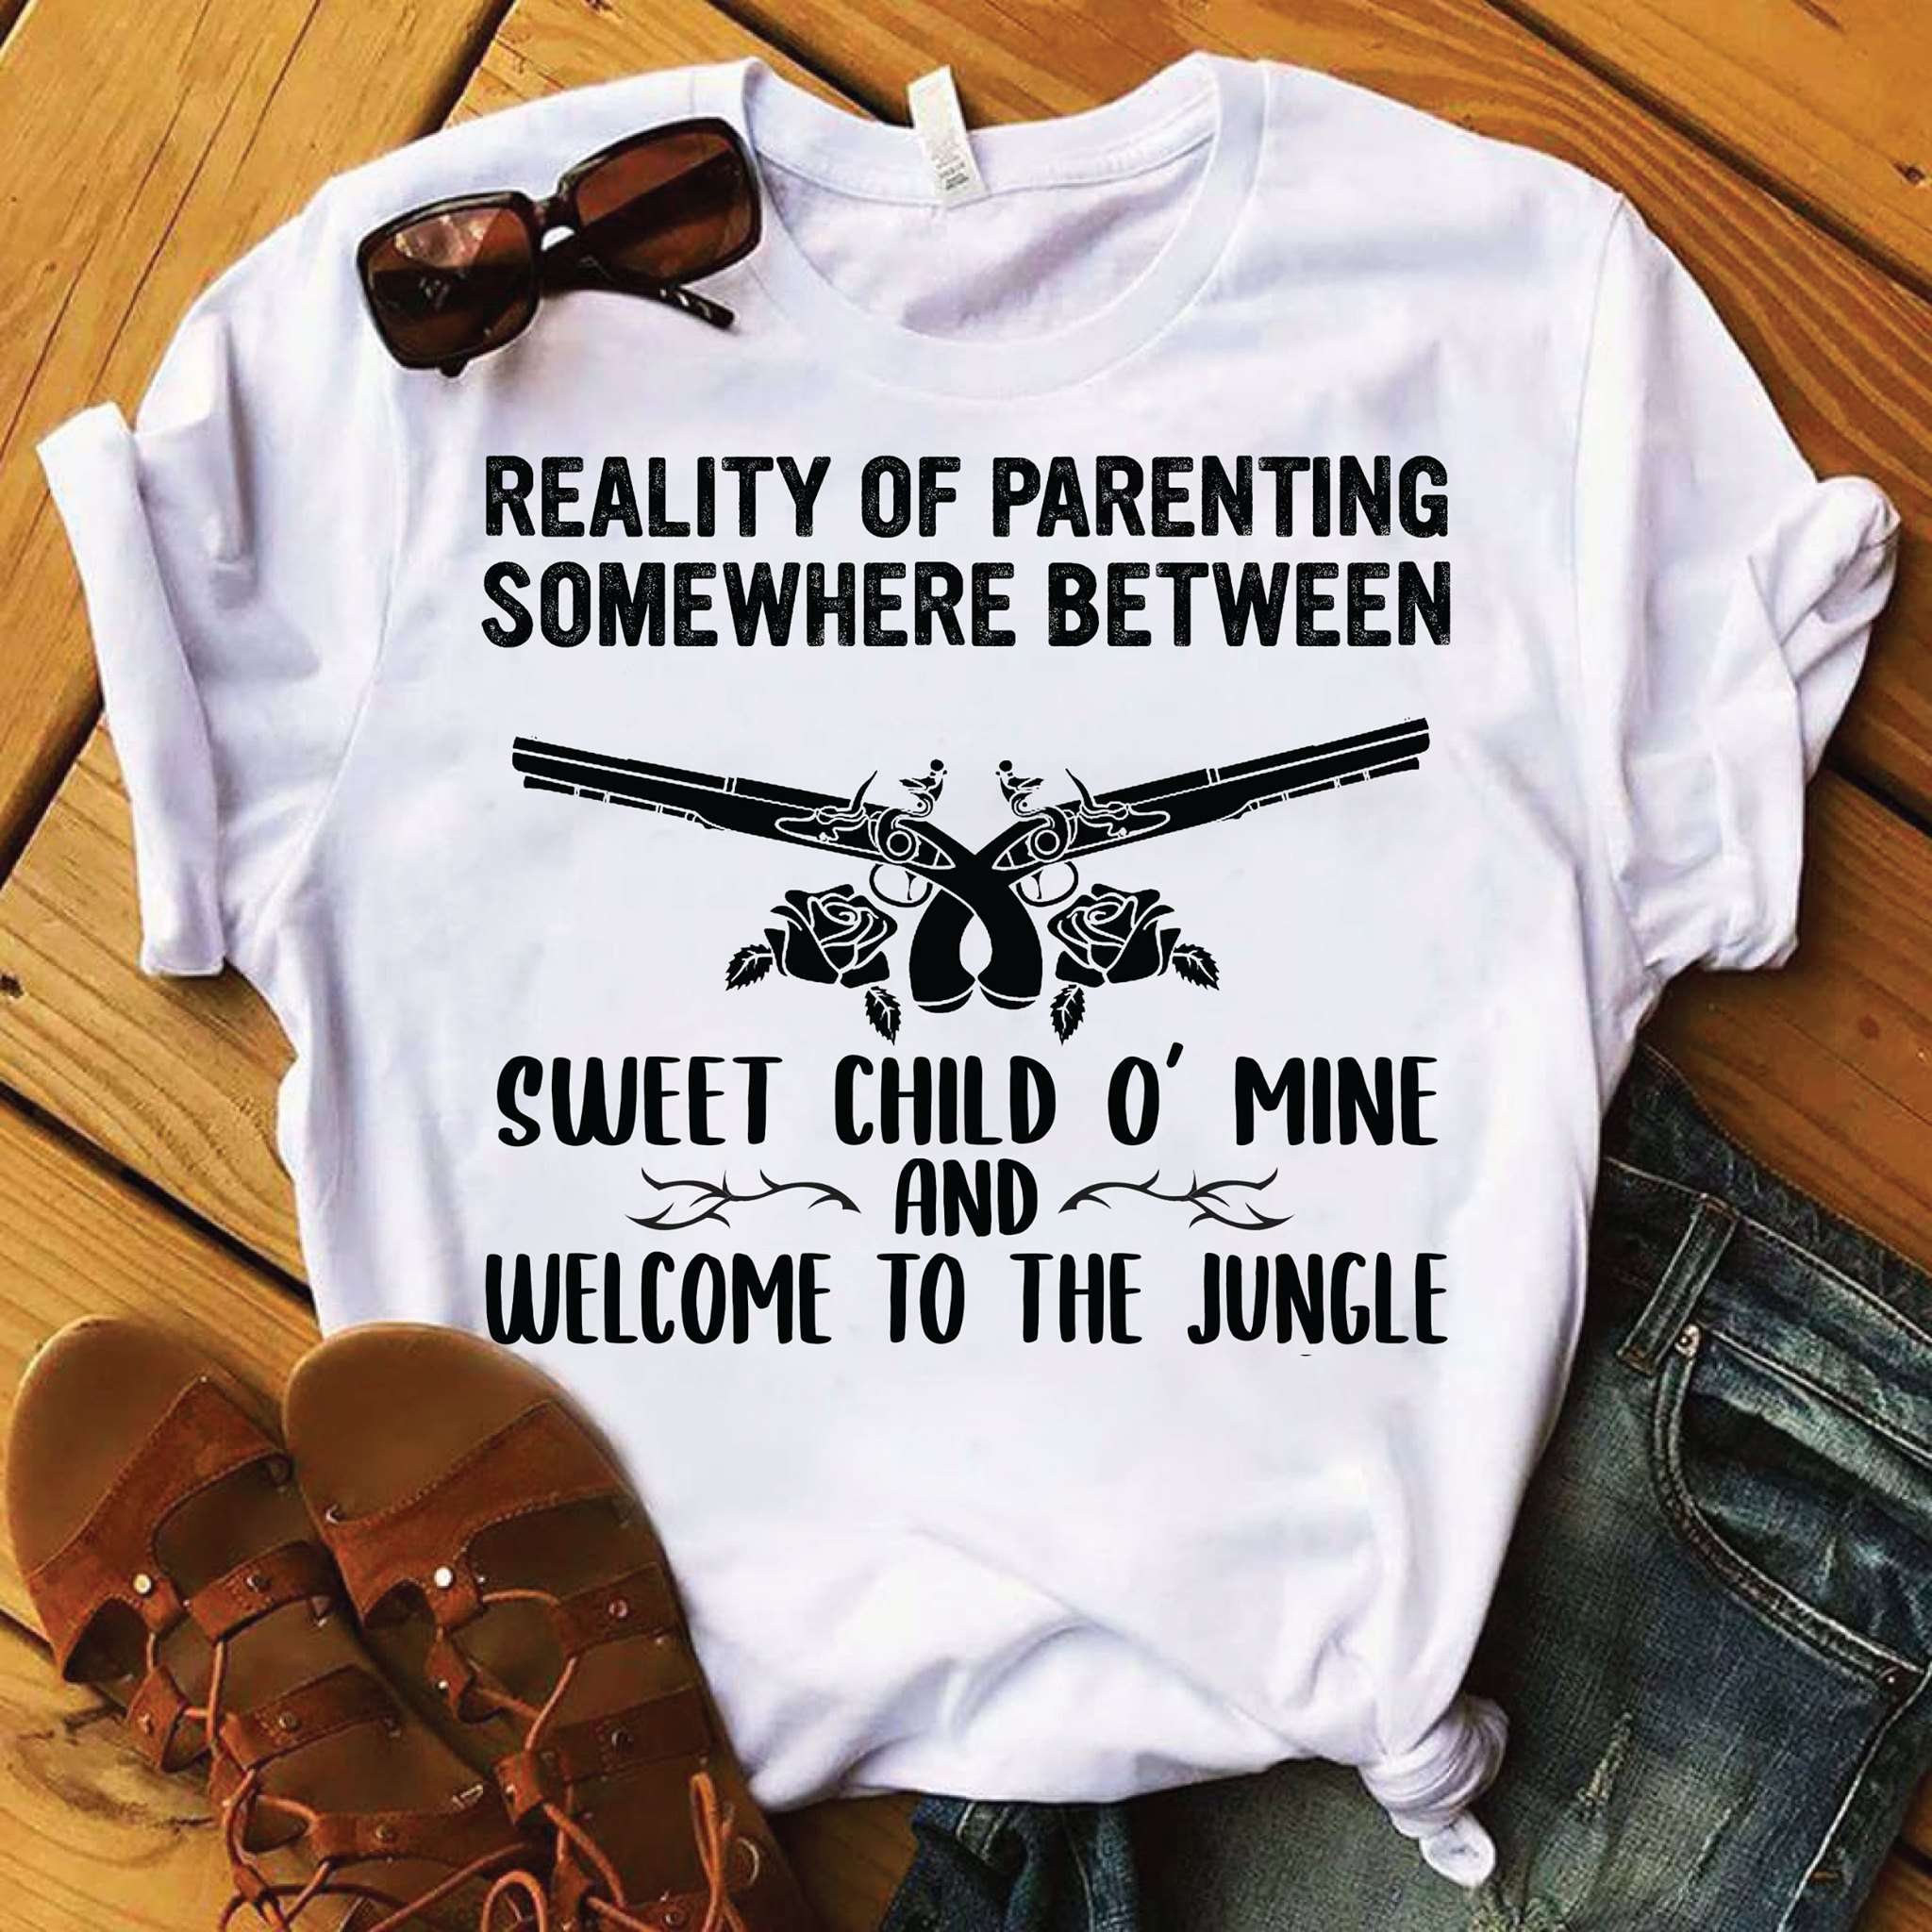 Reality of parenting somewhere between sweet child o' mine and welcome to the jungle